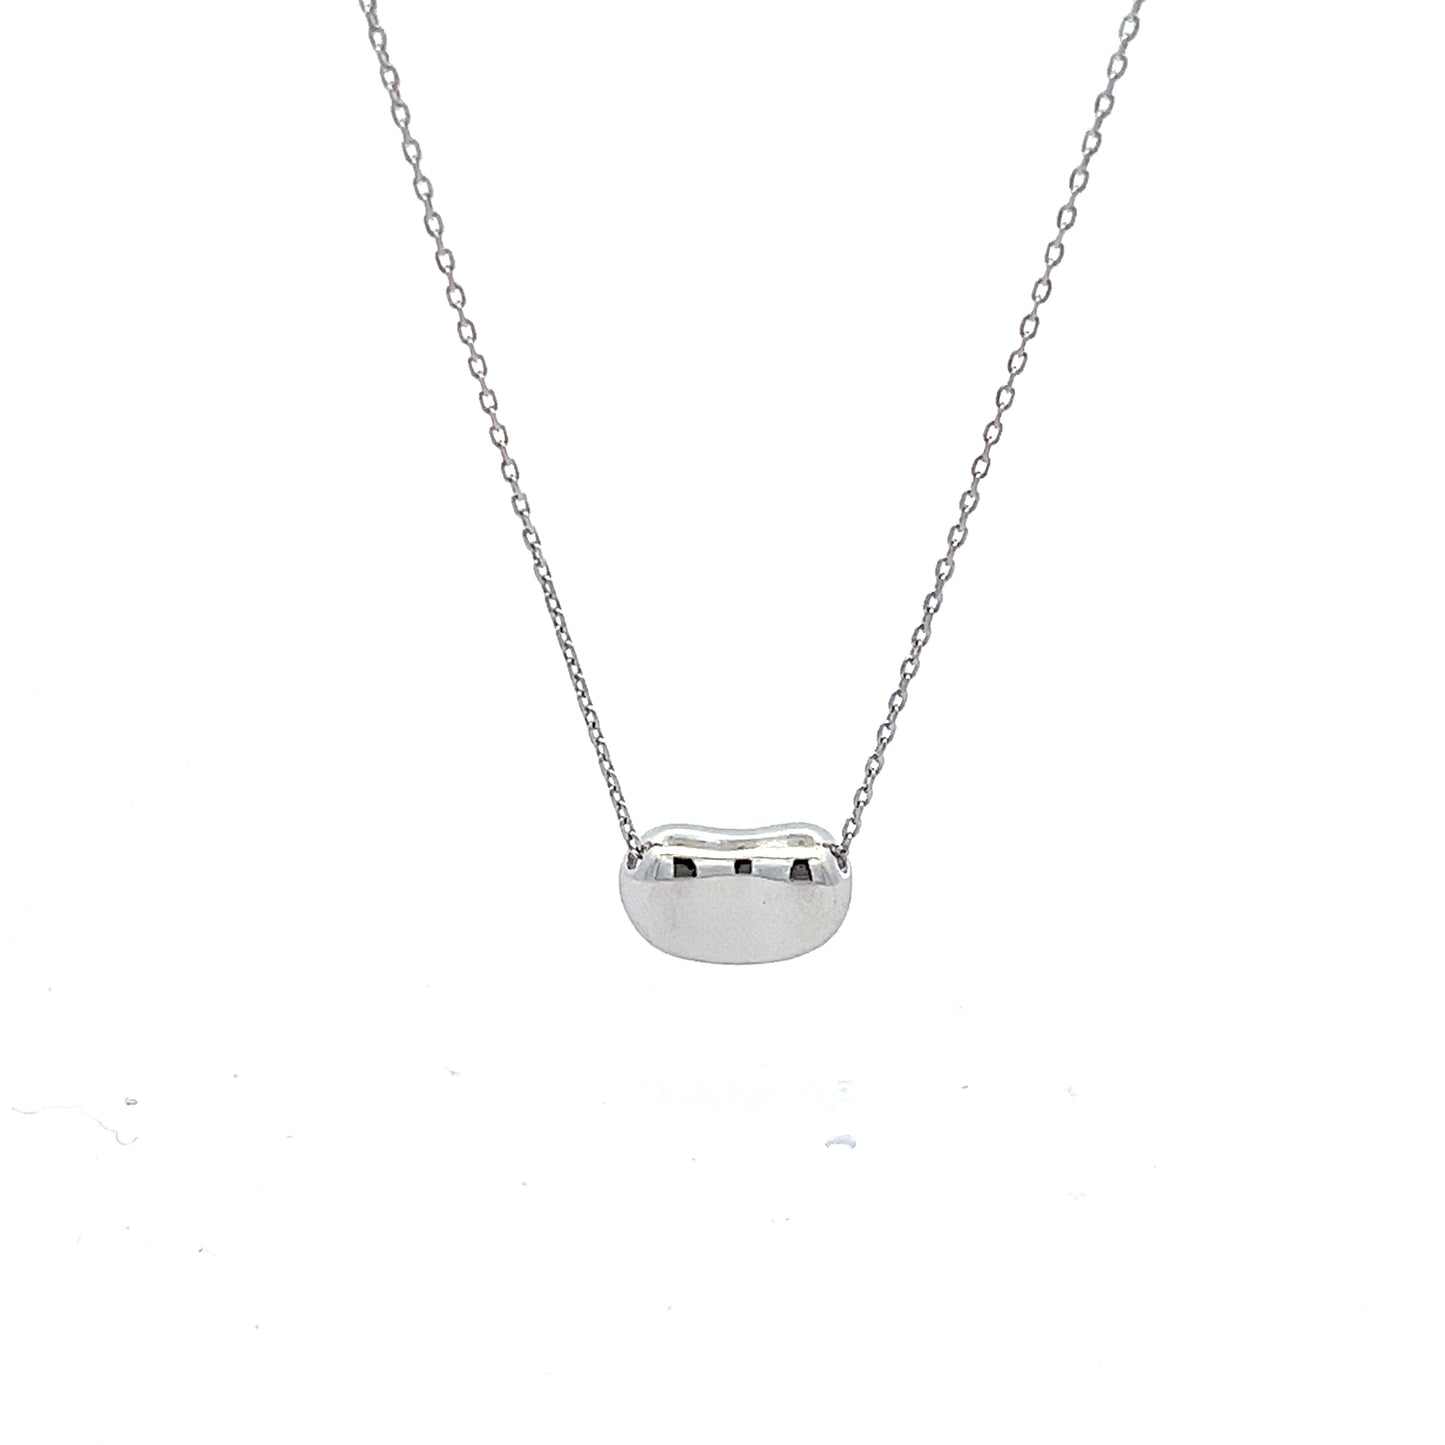 Peaberry Necklace in Silver